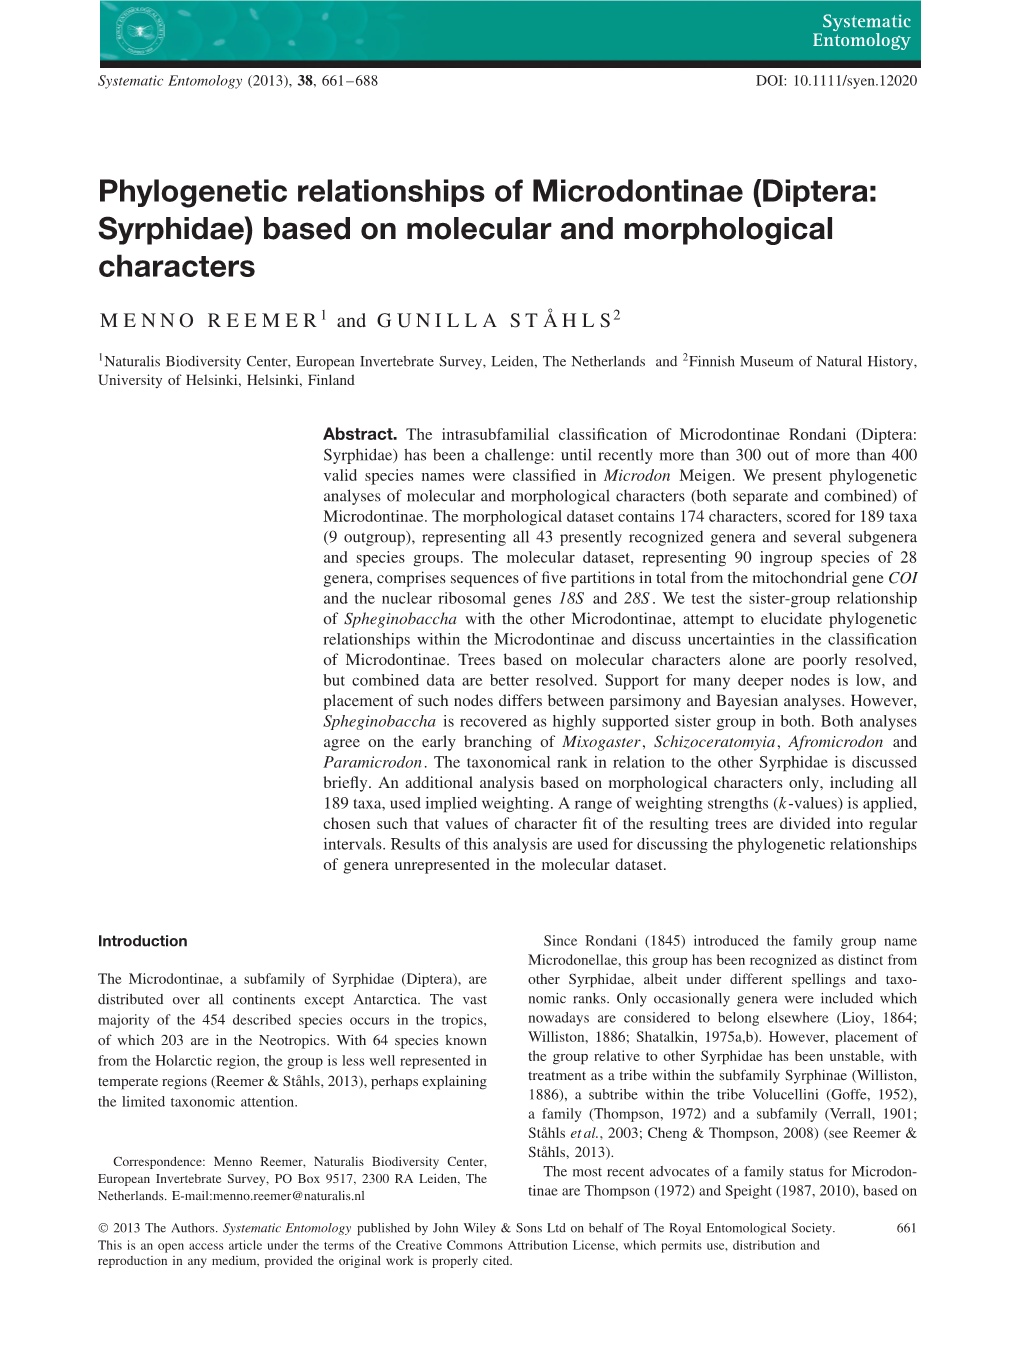 Phylogenetic Relationships of Microdontinae (Diptera: Syrphidae) Based on Molecular and Morphological Characters